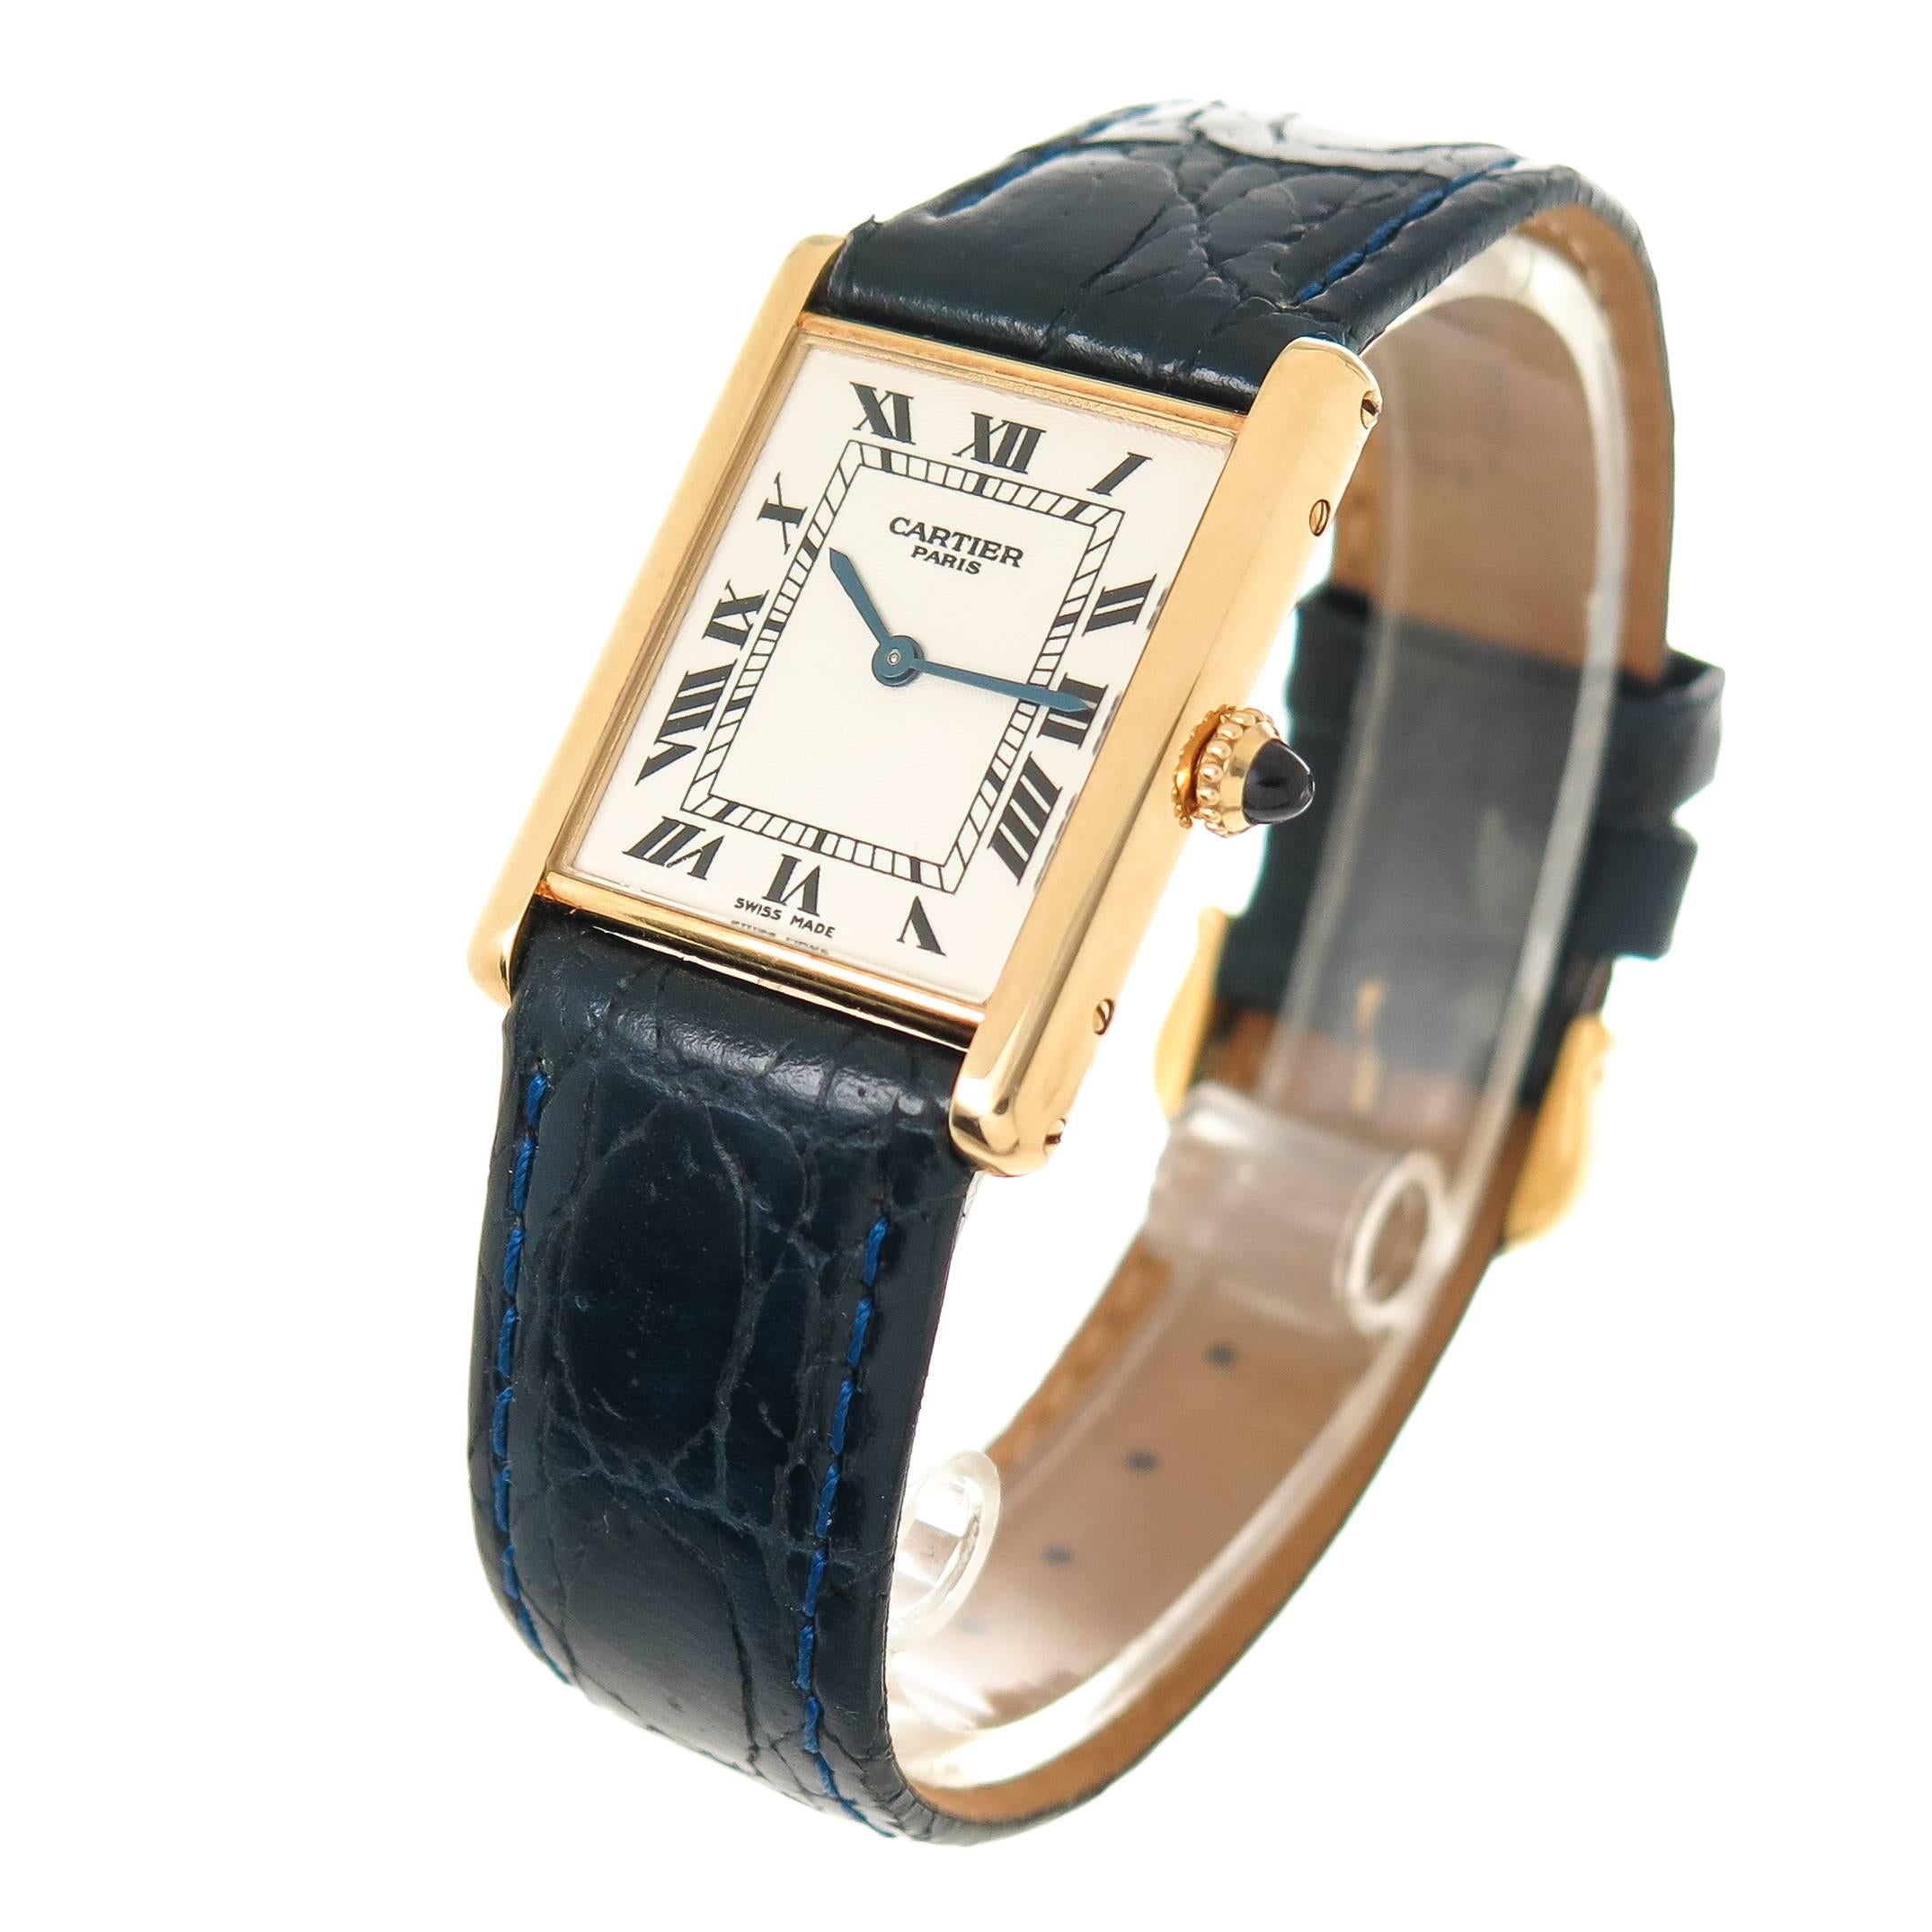 Circa 2000 Cartier classic 18K yellow Gold Tank watch. 30 X 23 MM Water Resistant case. Mechanical winding movement. Engine turned Silvered Dial with Black Roman Numerals, sapphire Crown. New Hadley Roma Dark Blue Textured strap with Gold Plate